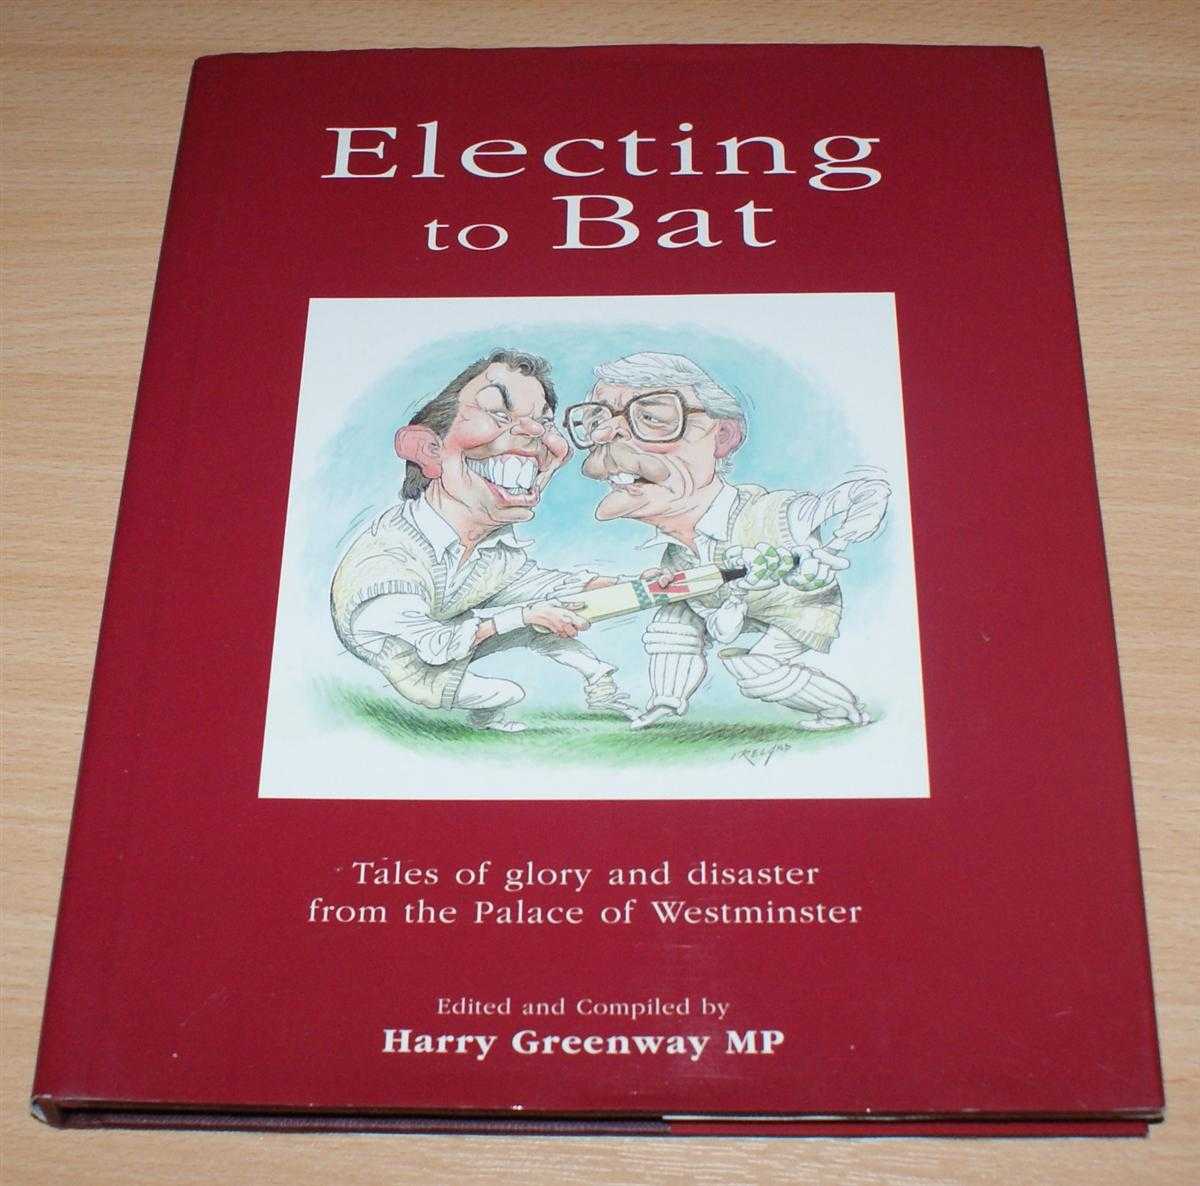 Harry Greenway MP; Illustrations by John Ireland - Electing to Bat: Tales of glory and disaster from the Palace of Westminster